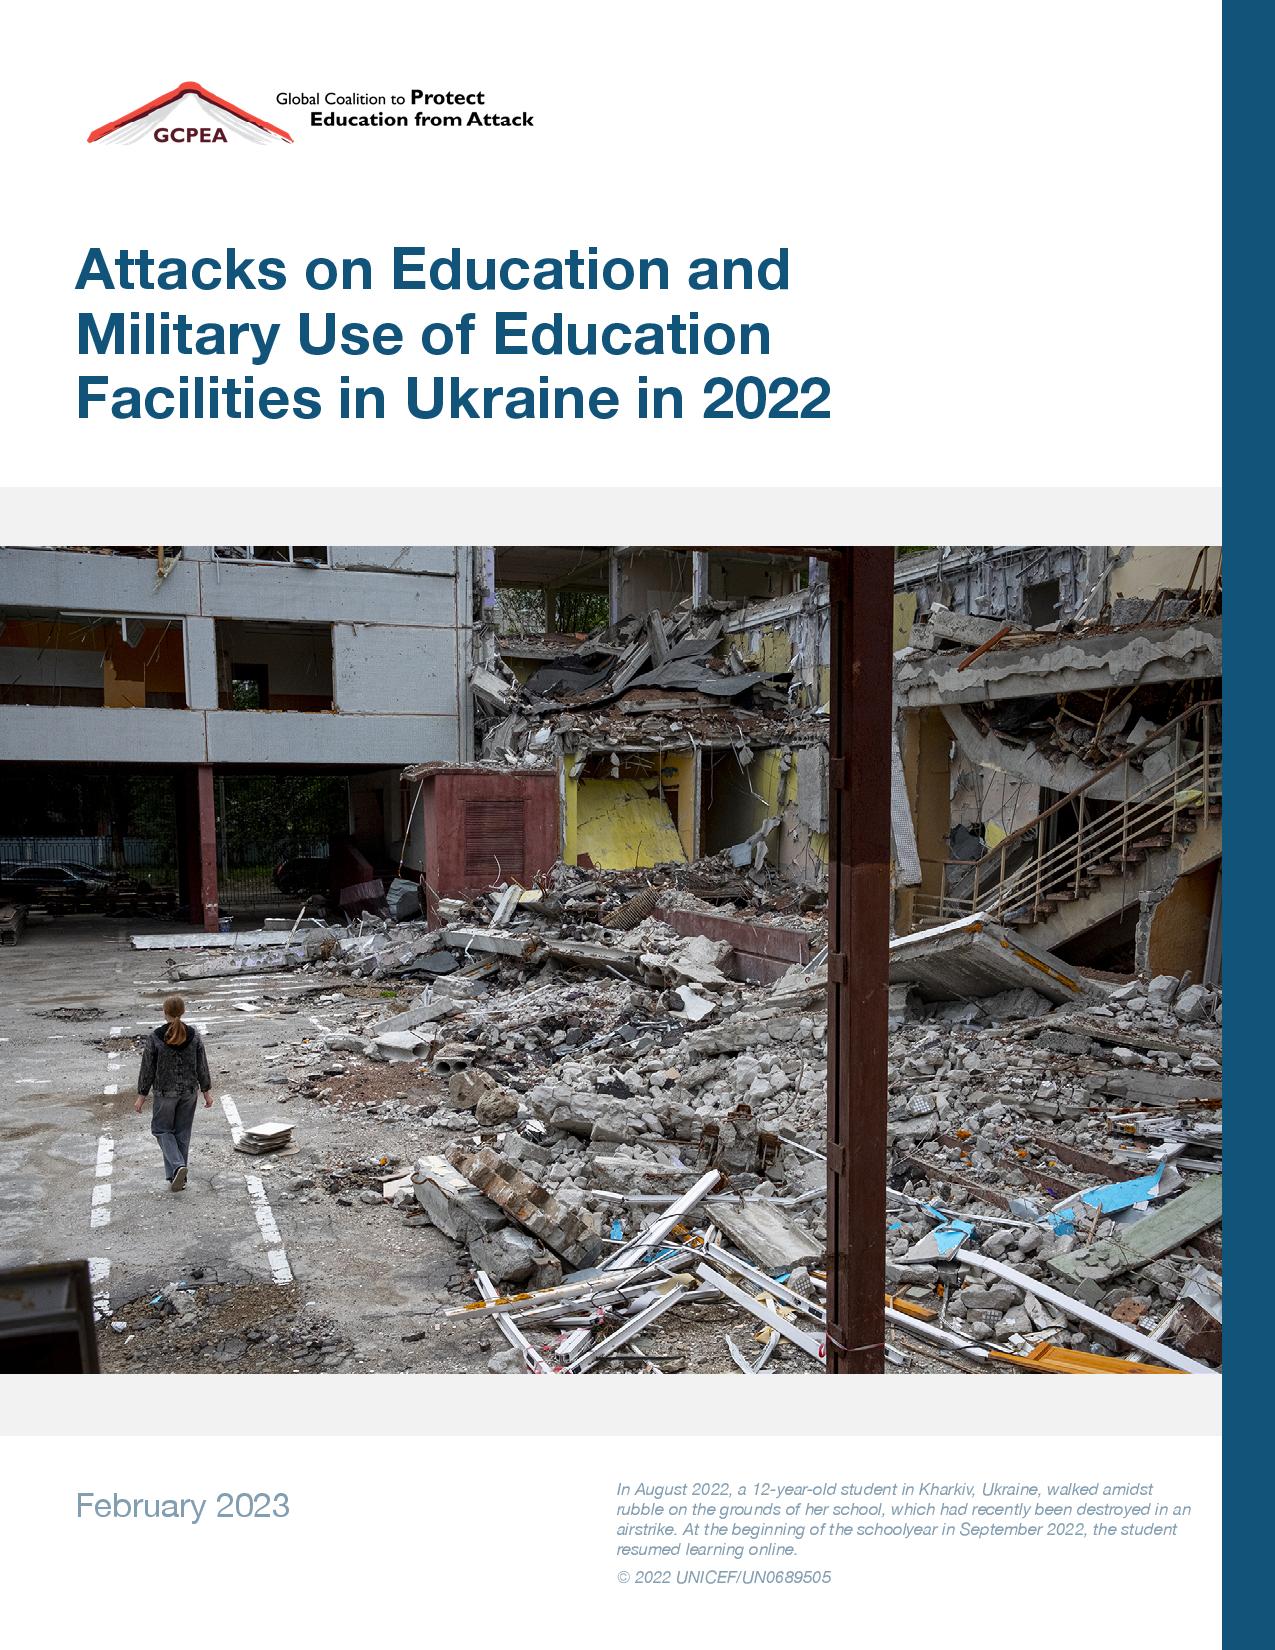 GCPEA Attacks on Education and Military Use in Ukraine-page-001